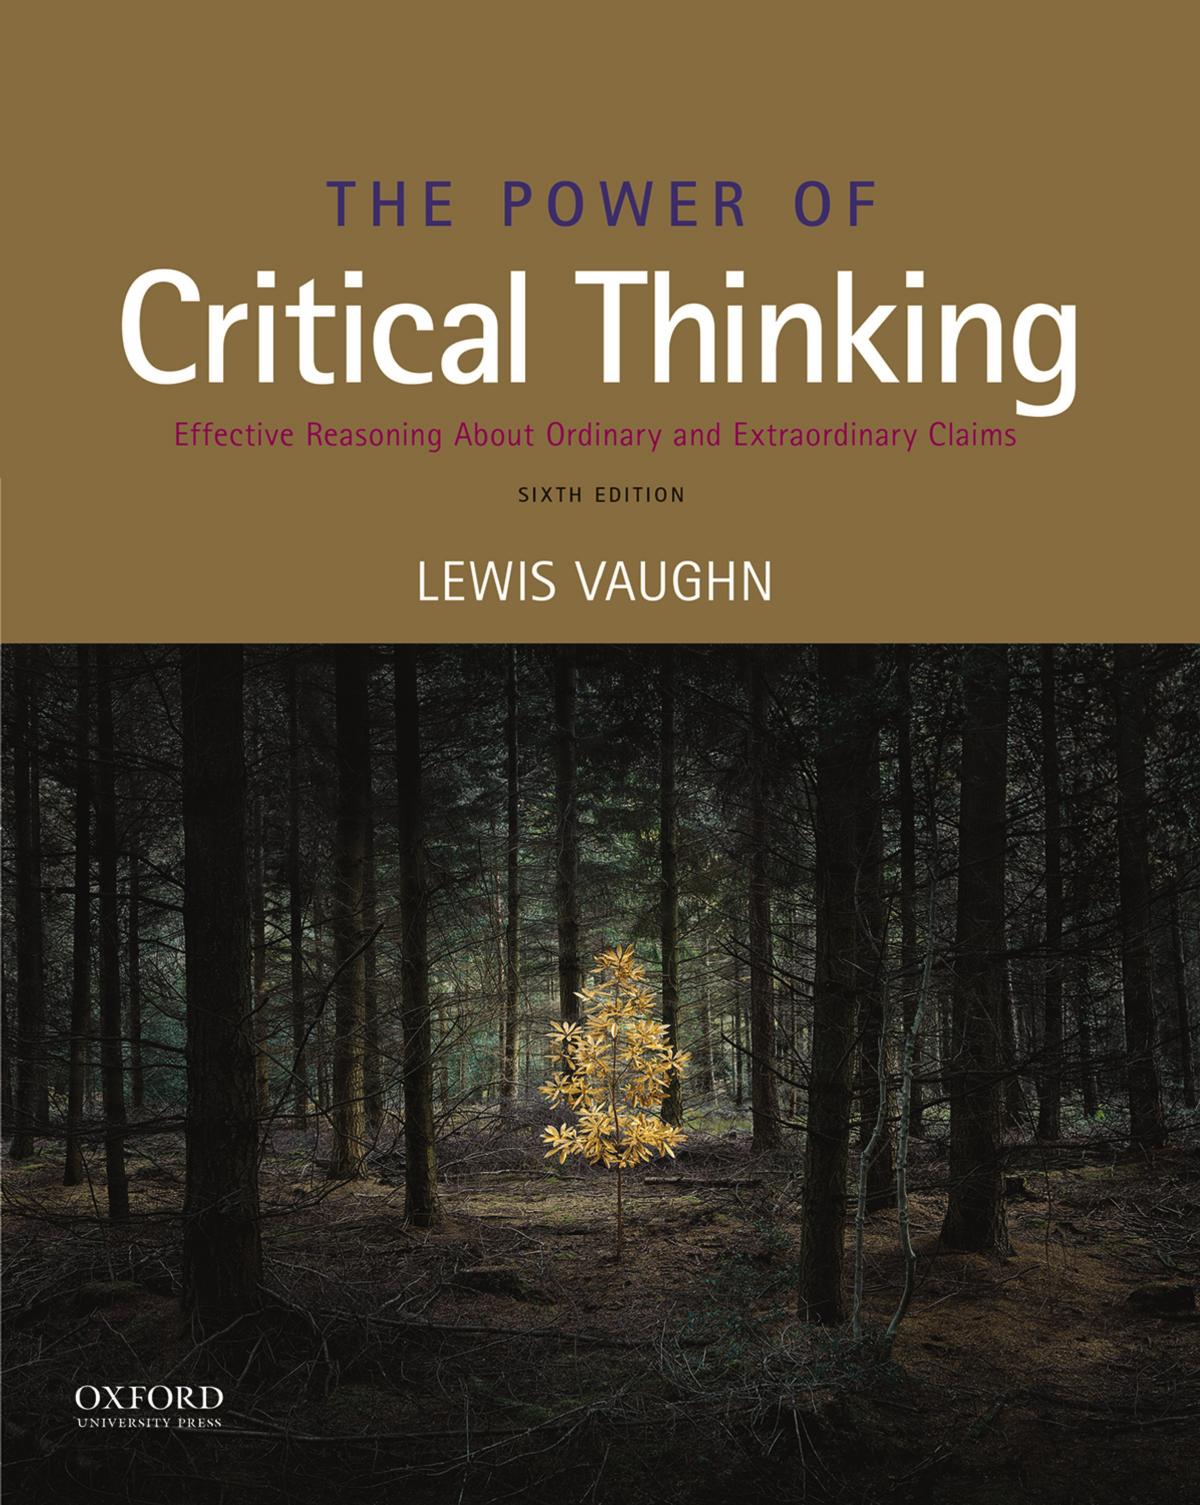 The Power of Critical Thinking: Effective Reasoning About Ordinary and Extraordinary Claims - 6th Edition